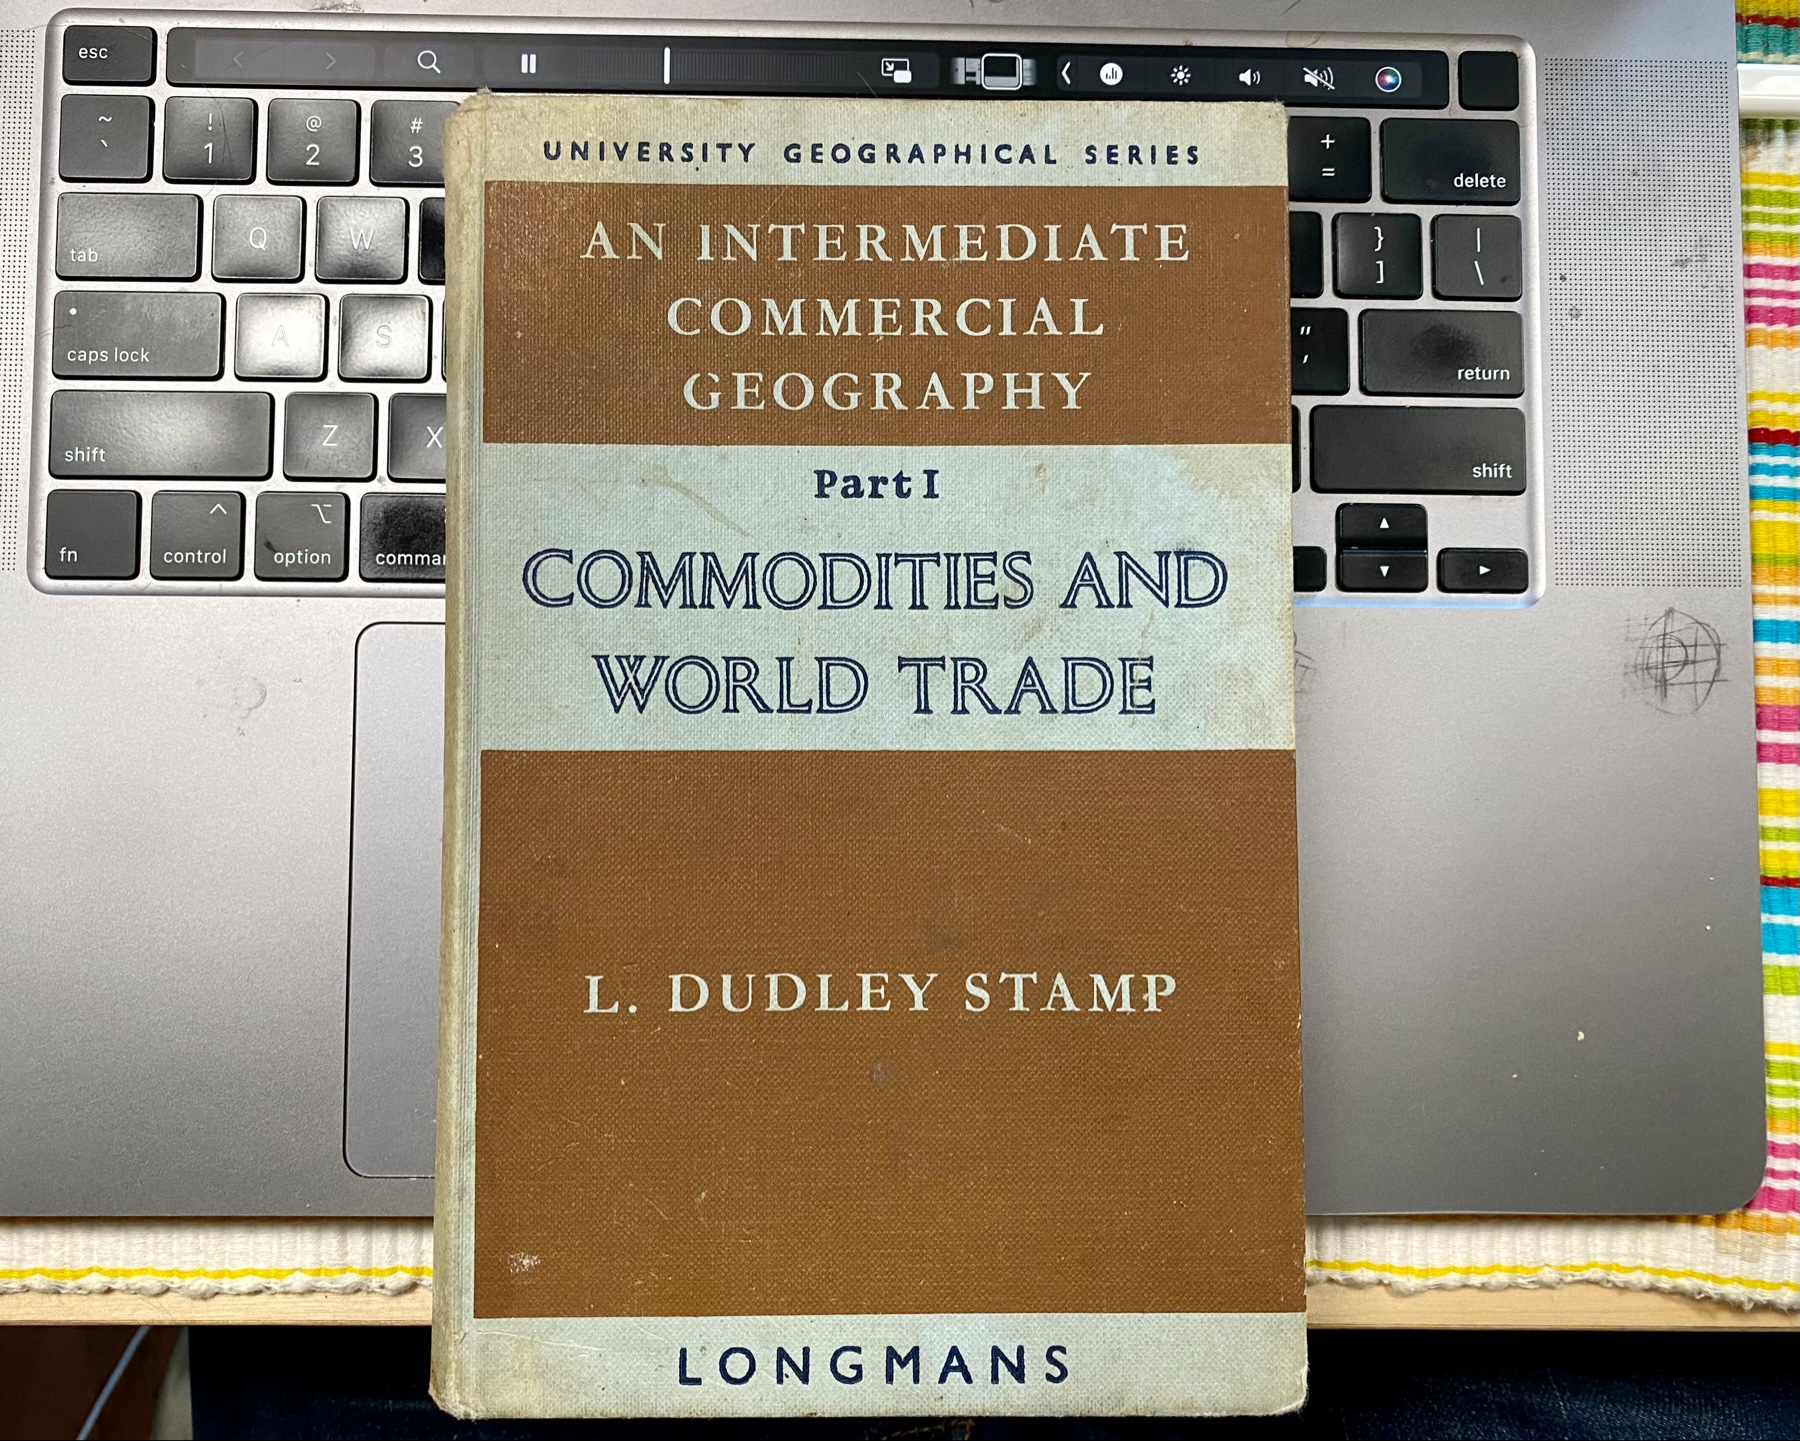 From An Intermediate Commercial Geography, Part 1: Commodities and World Trade